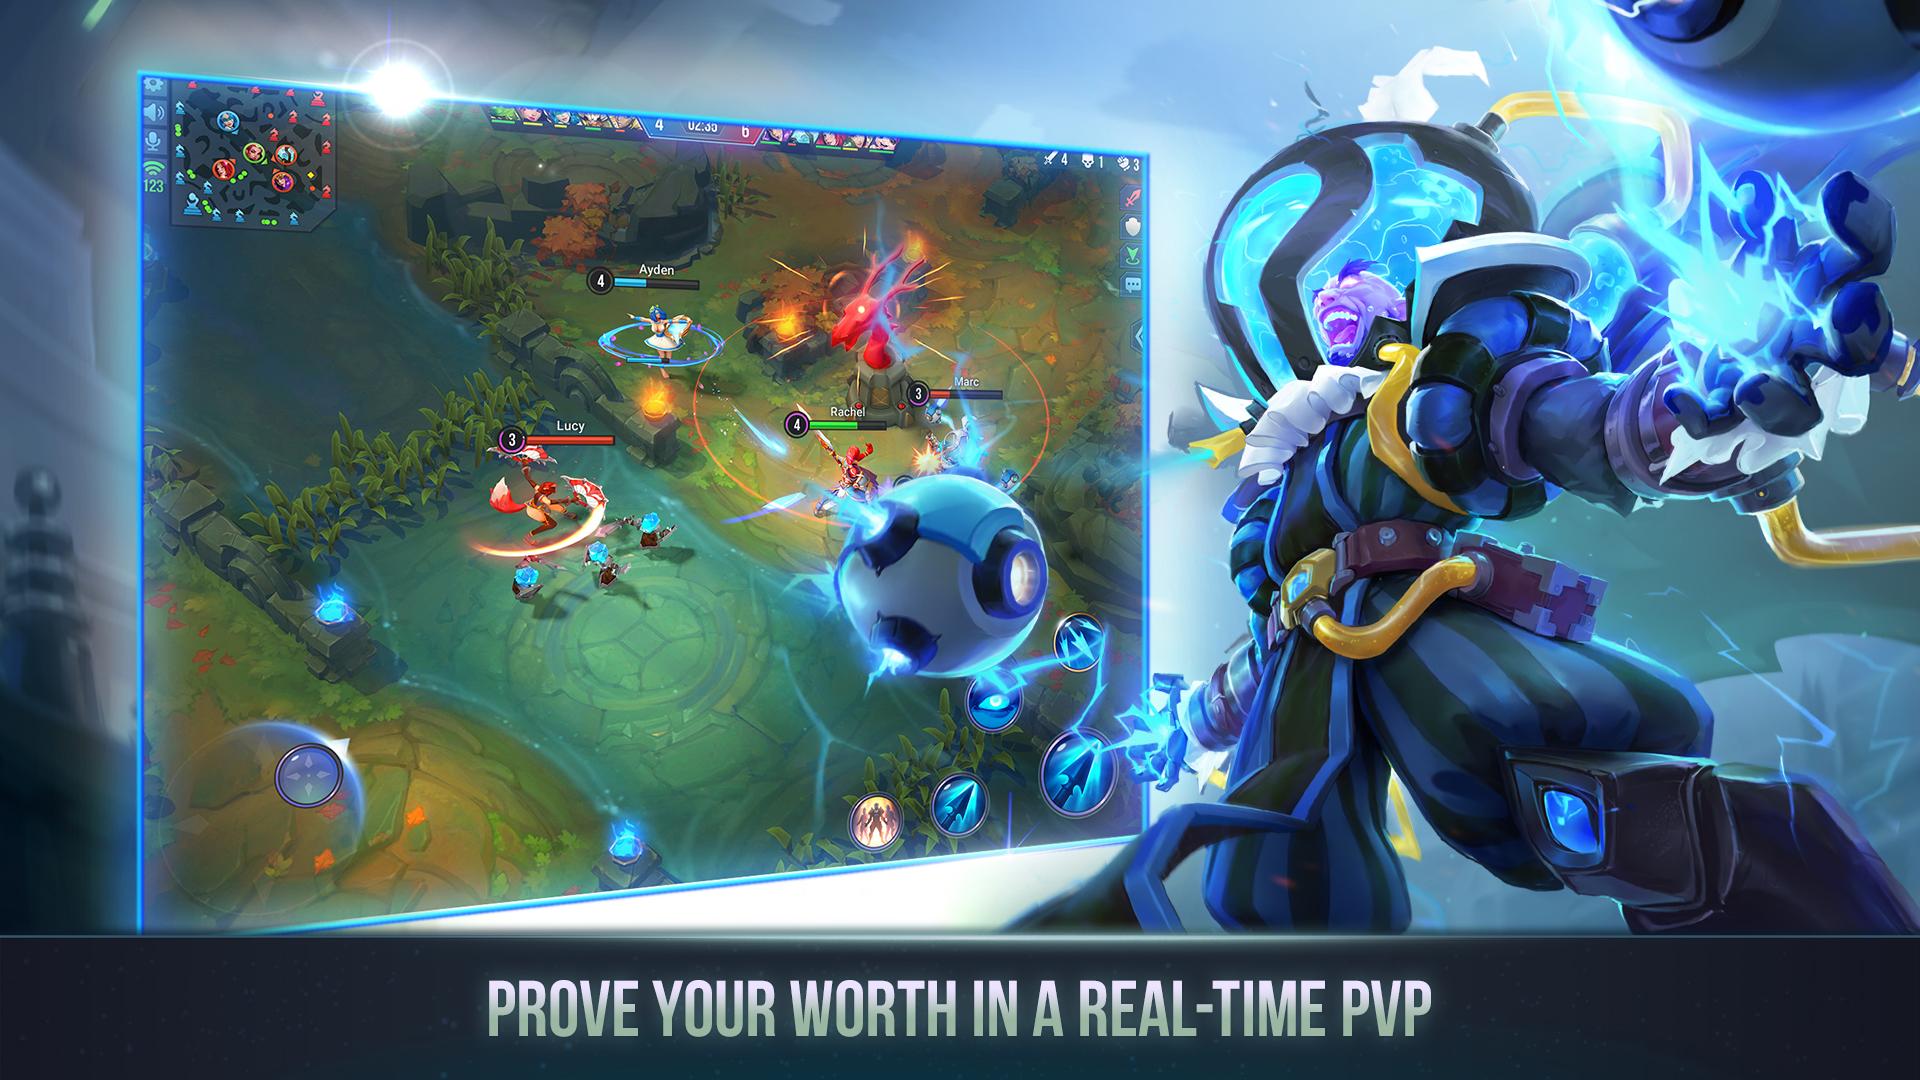 Download Dungeon Hunter Champions on PC with BlueStacks